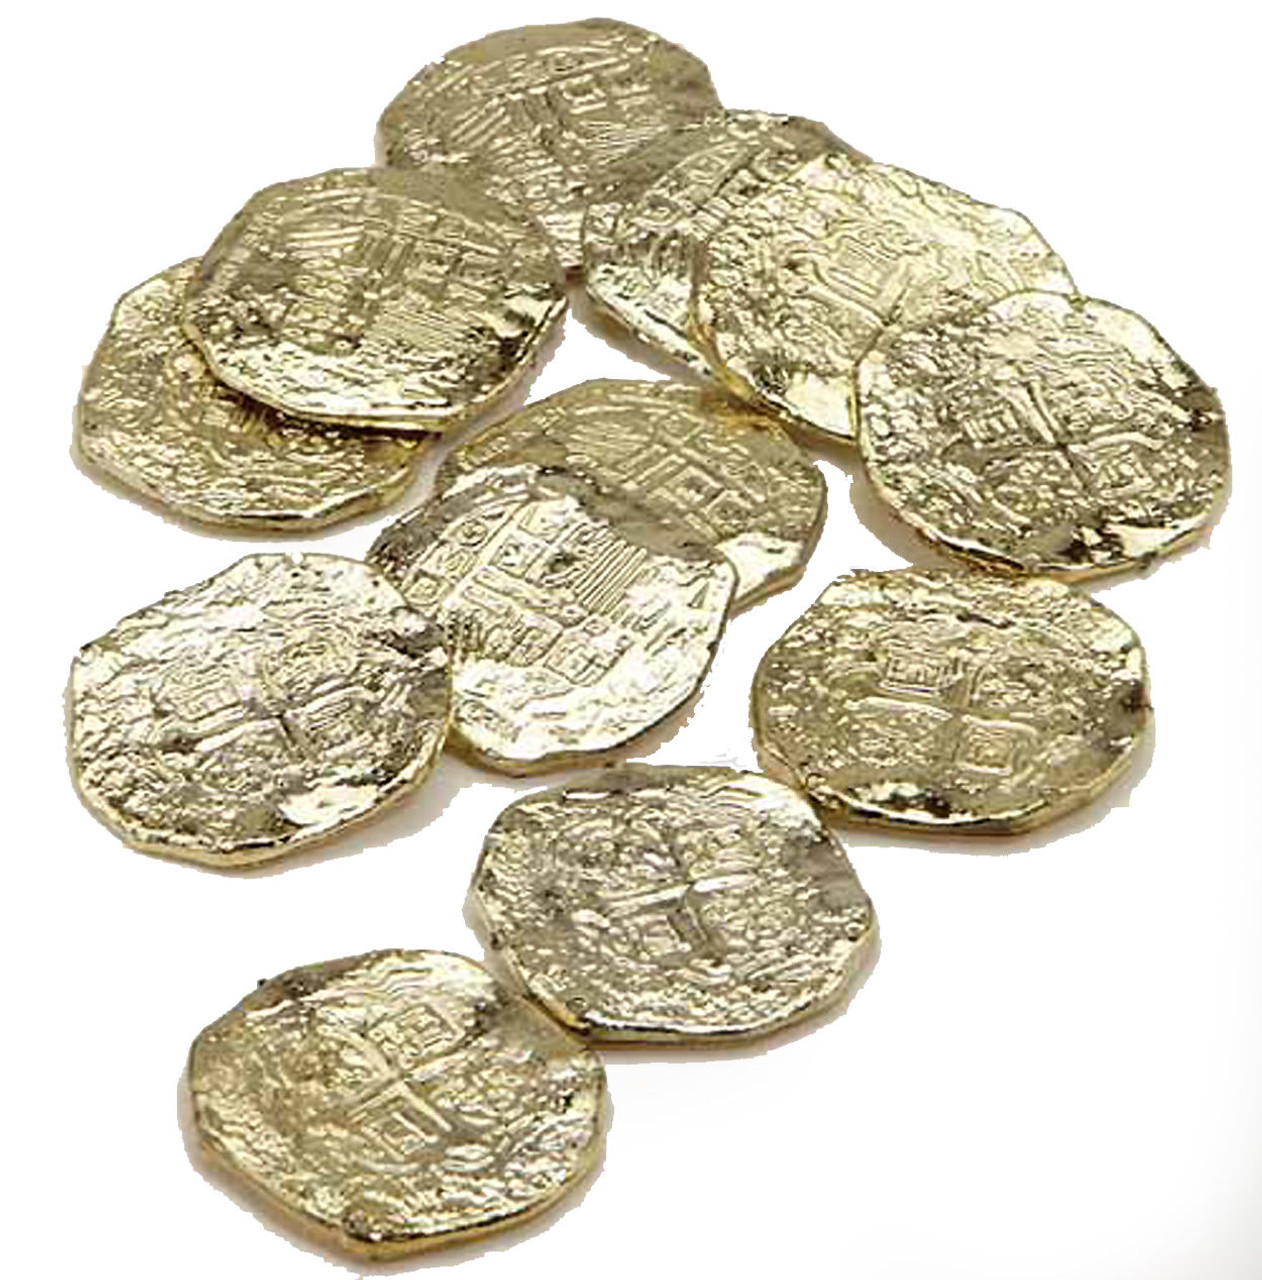 old gold pirate coins